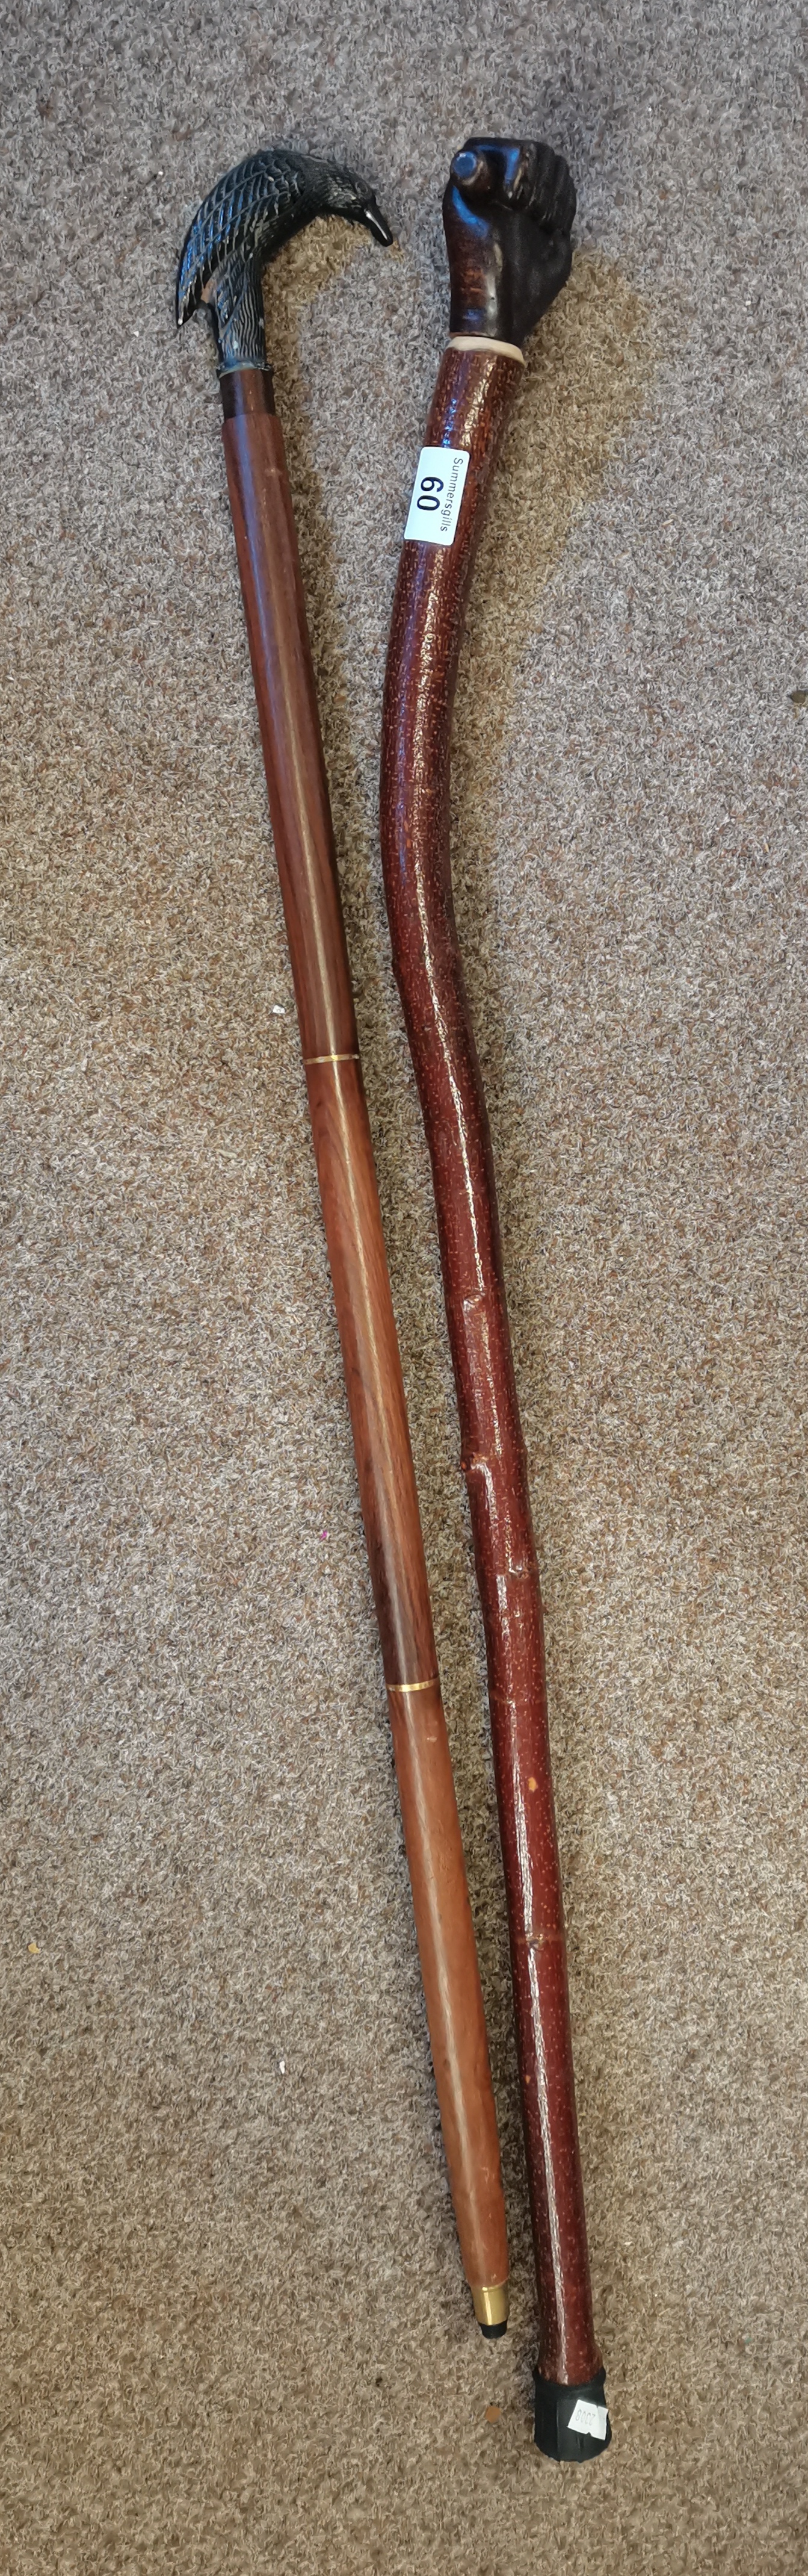 x2 Walking sticks one with a bird head and other with a clenched fist